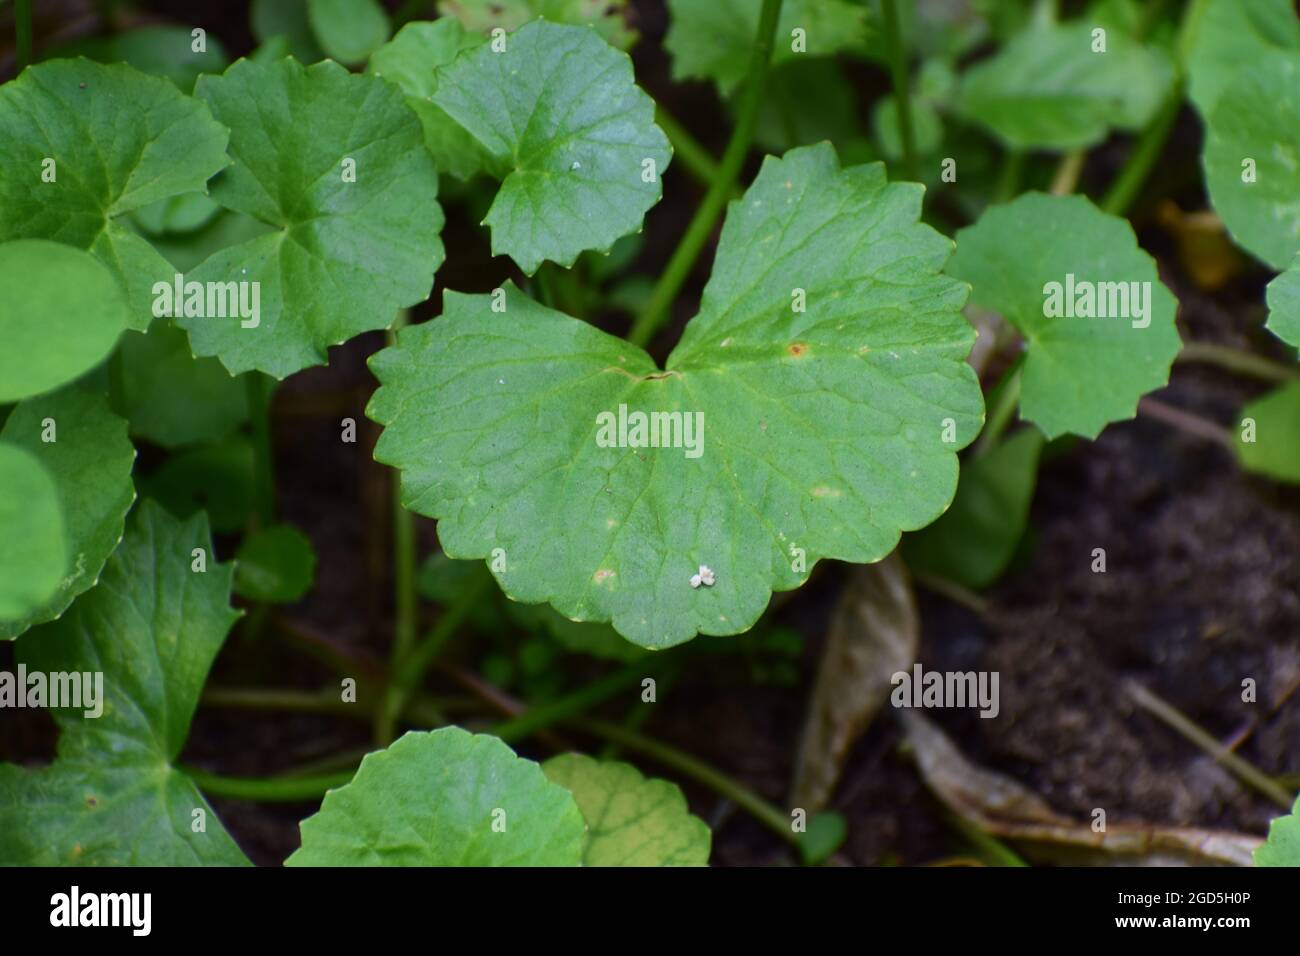 Green Pennywort leaves and plants on the agriculture land, Pennywort cultivation on wet farm land, Centella asiatica plants Stock Photo